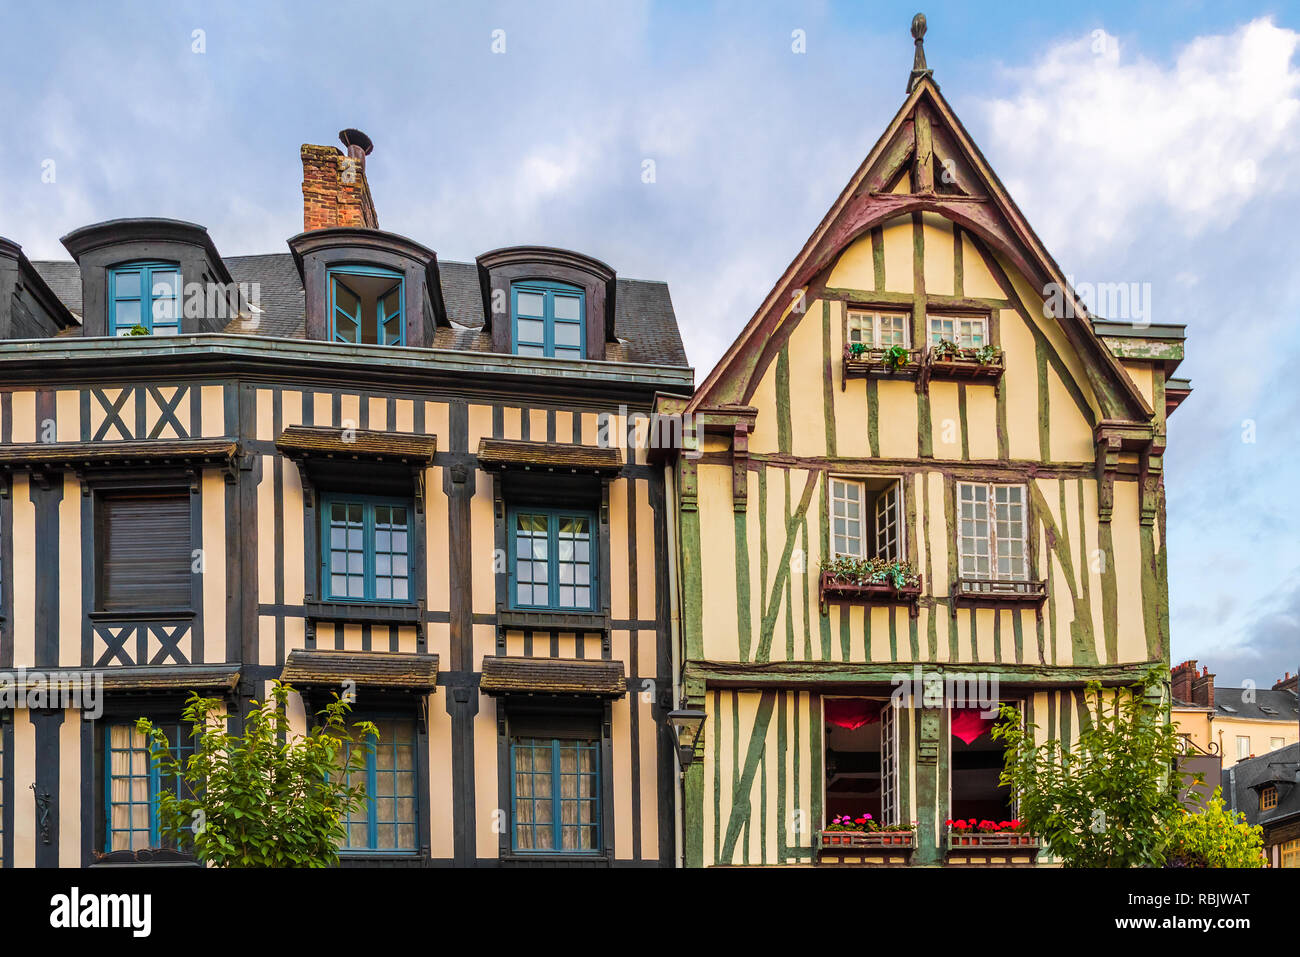 Typical houses in old town of Rouen, Normandy, France in the morning Stock Photo